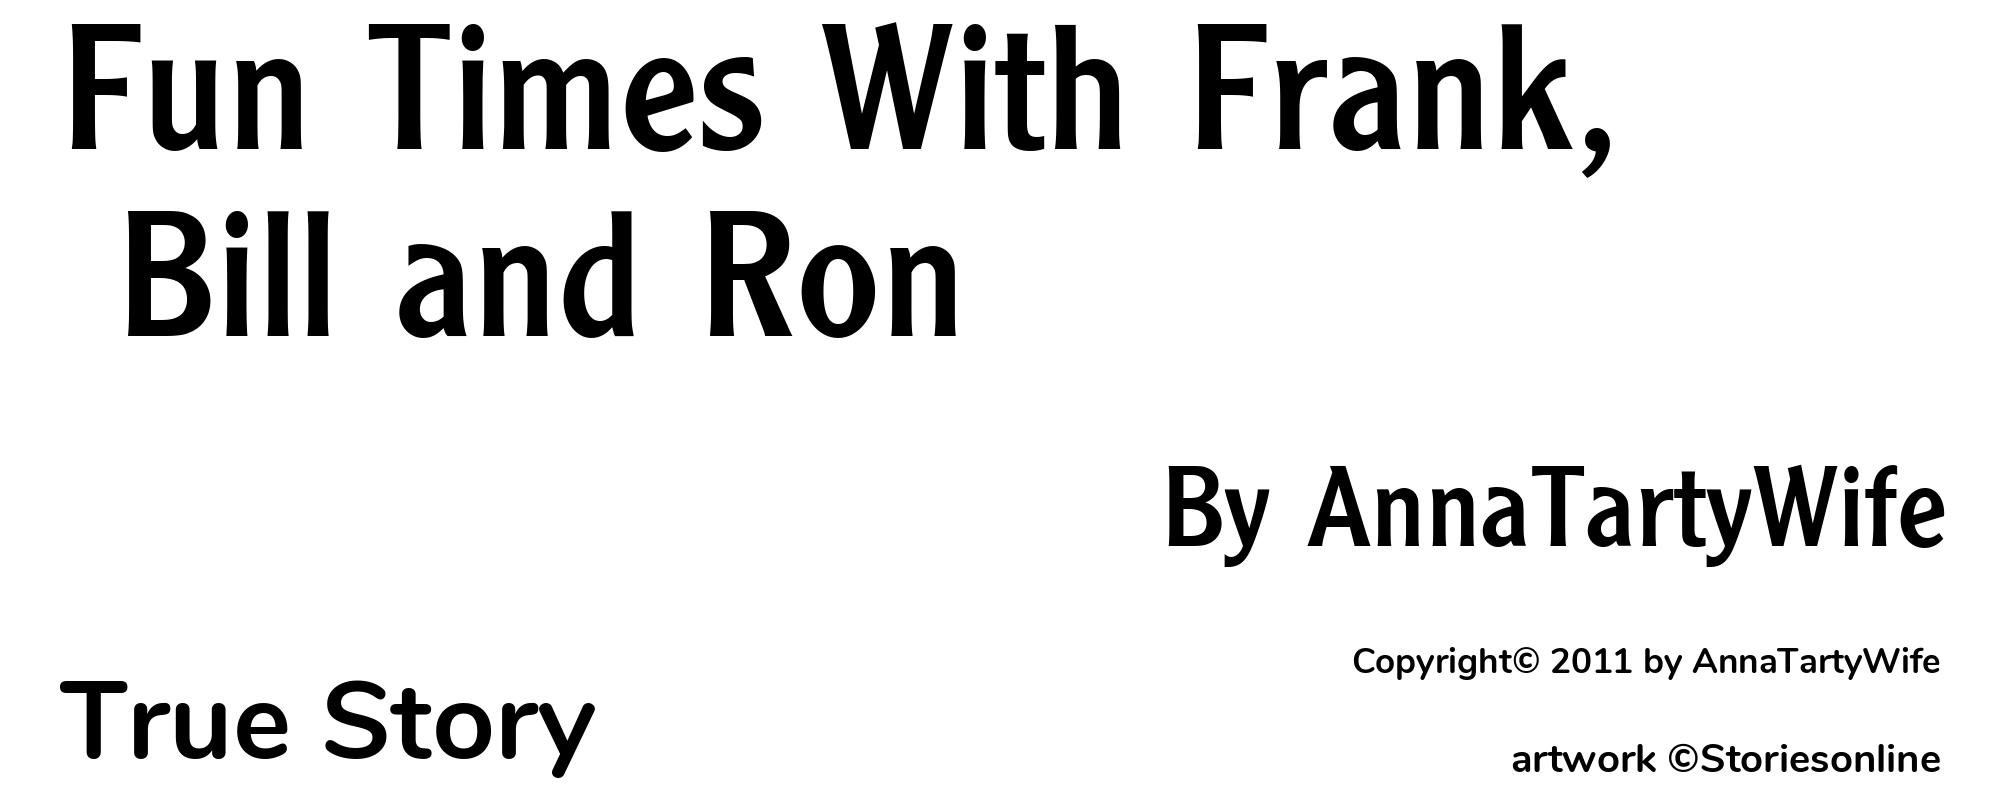 Fun Times With Frank, Bill and Ron - Cover